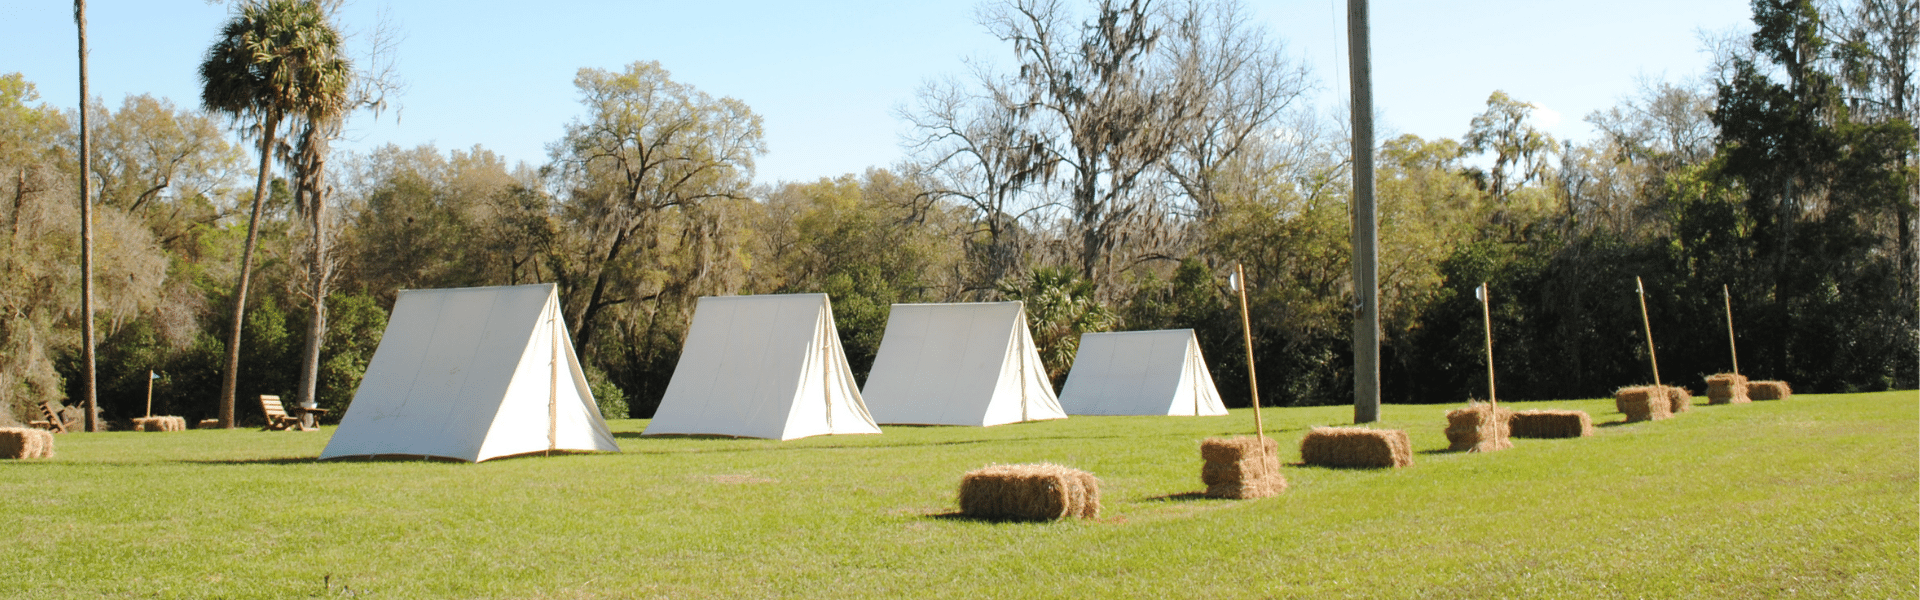 Fort King tent